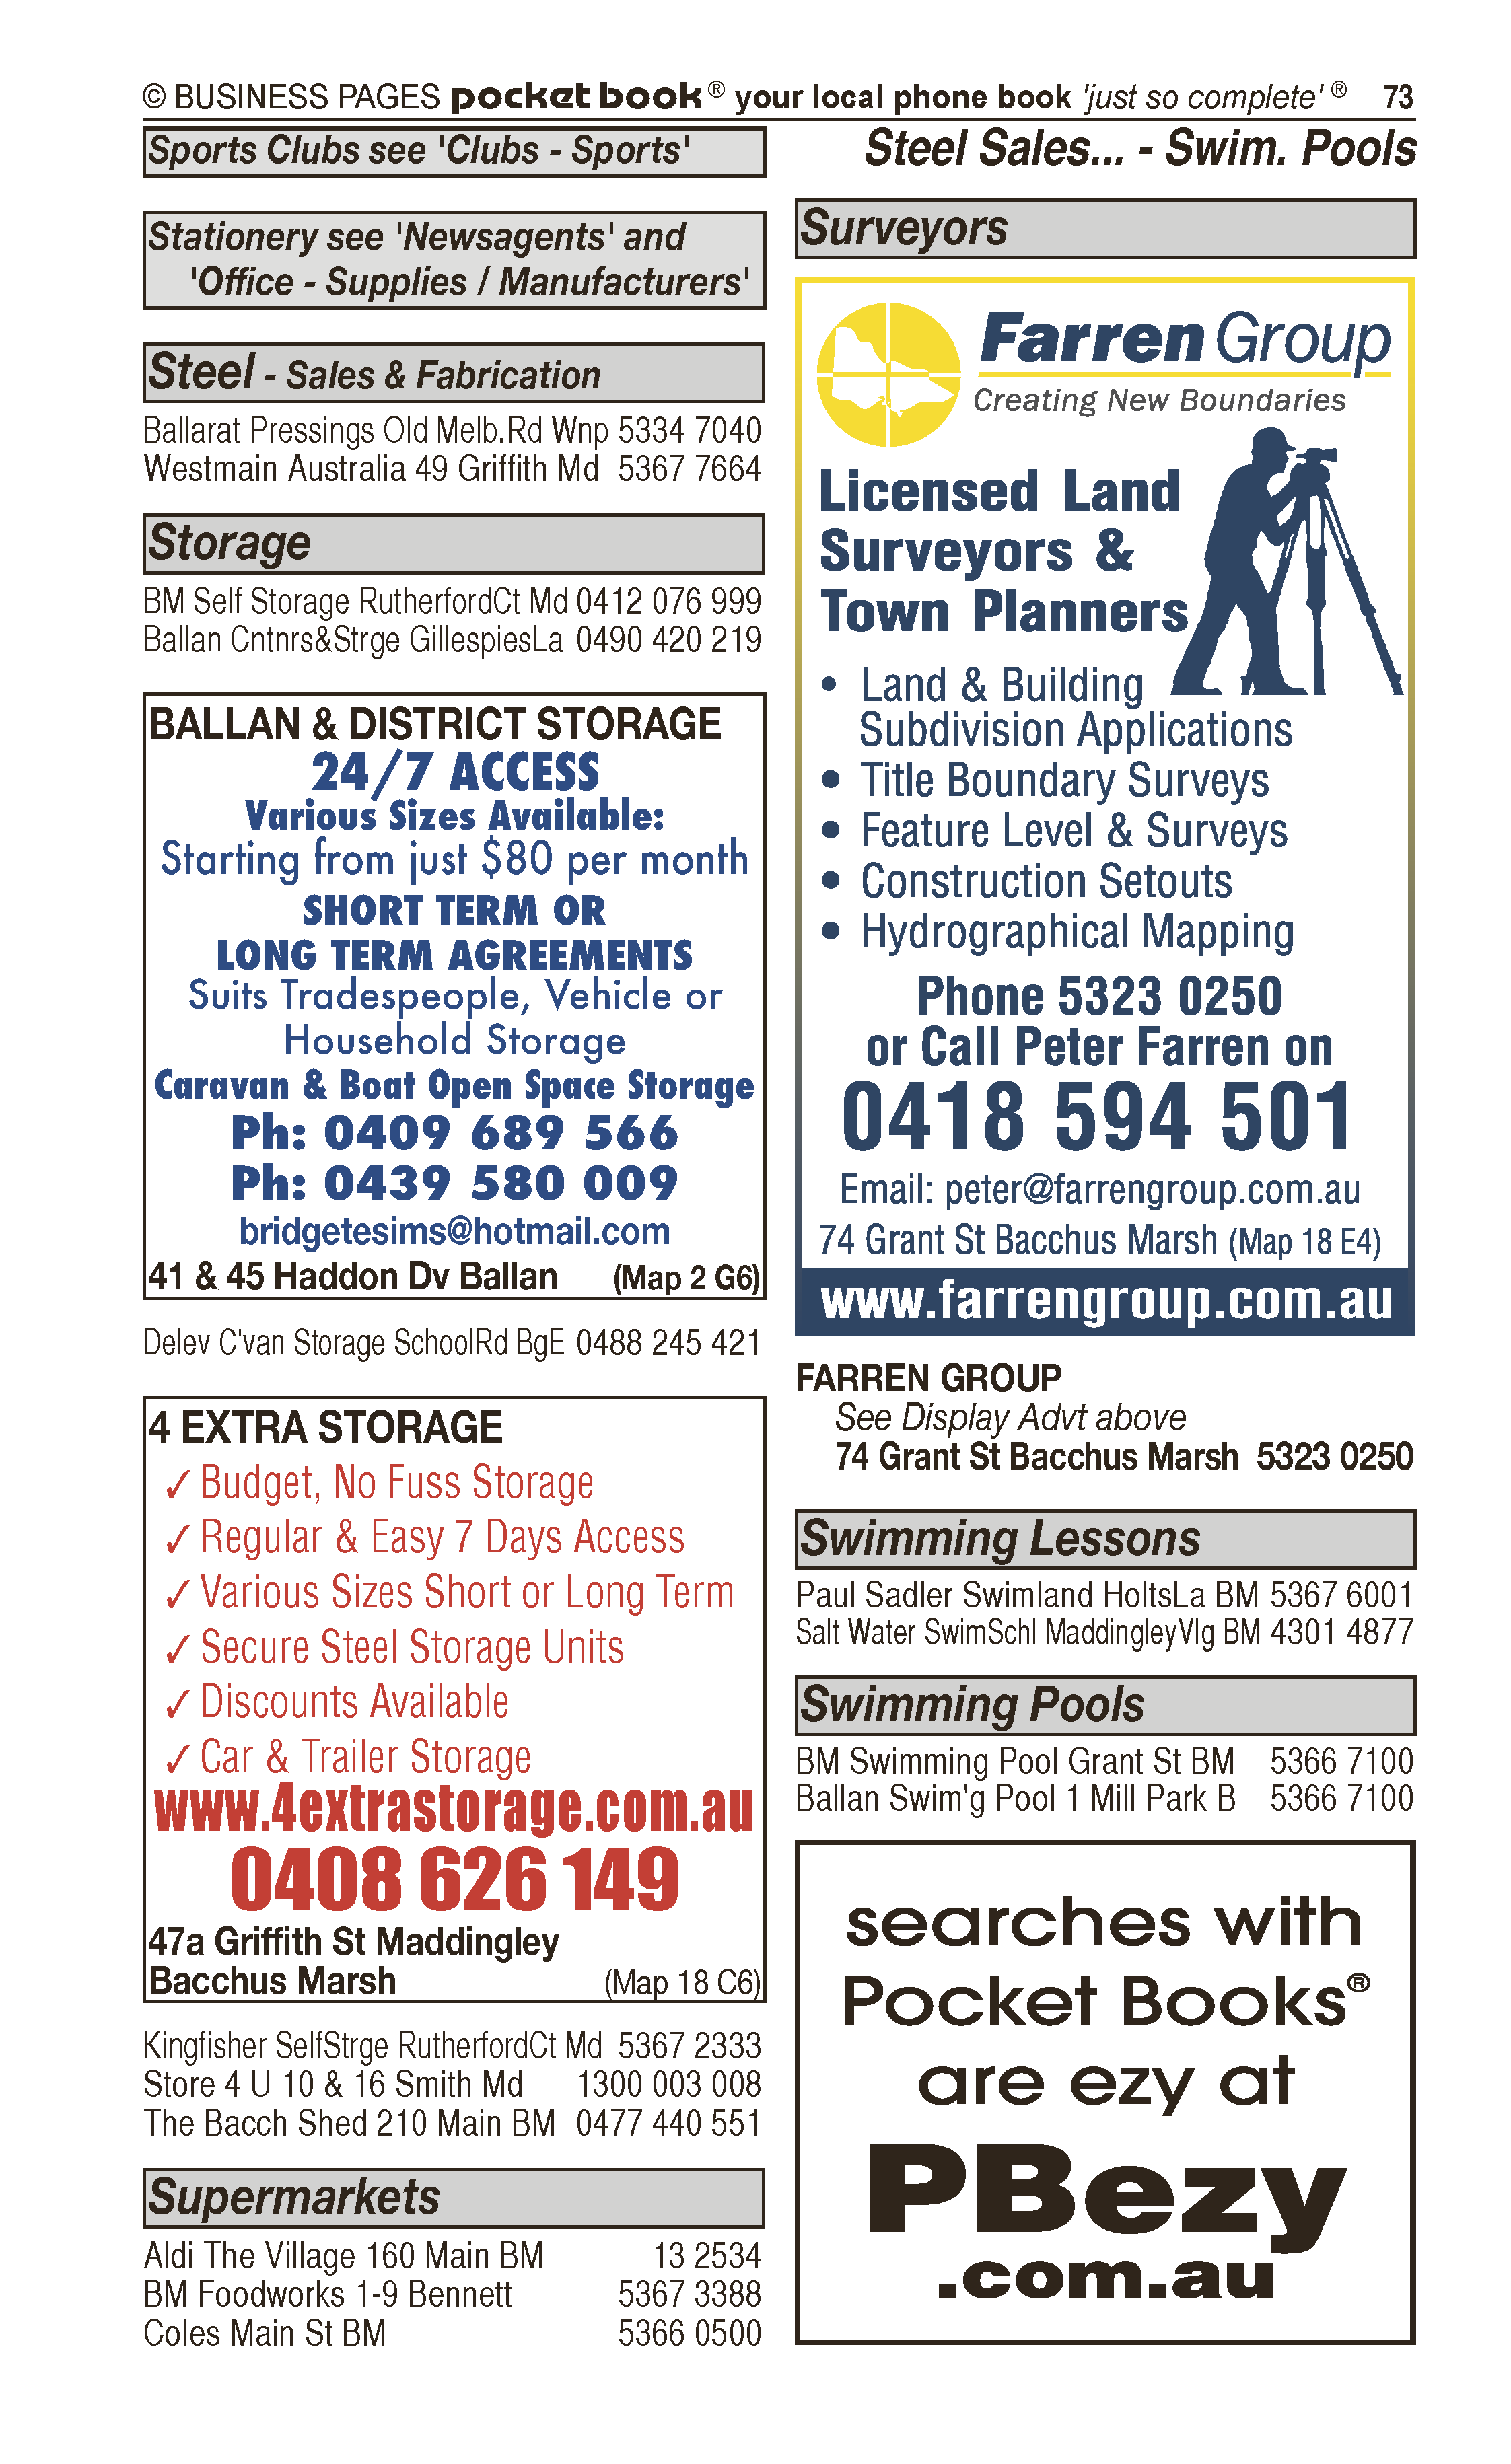 Farren Group | Surveyors in Bacchus Marsh | PBezy Pocket Books local directories - page 73